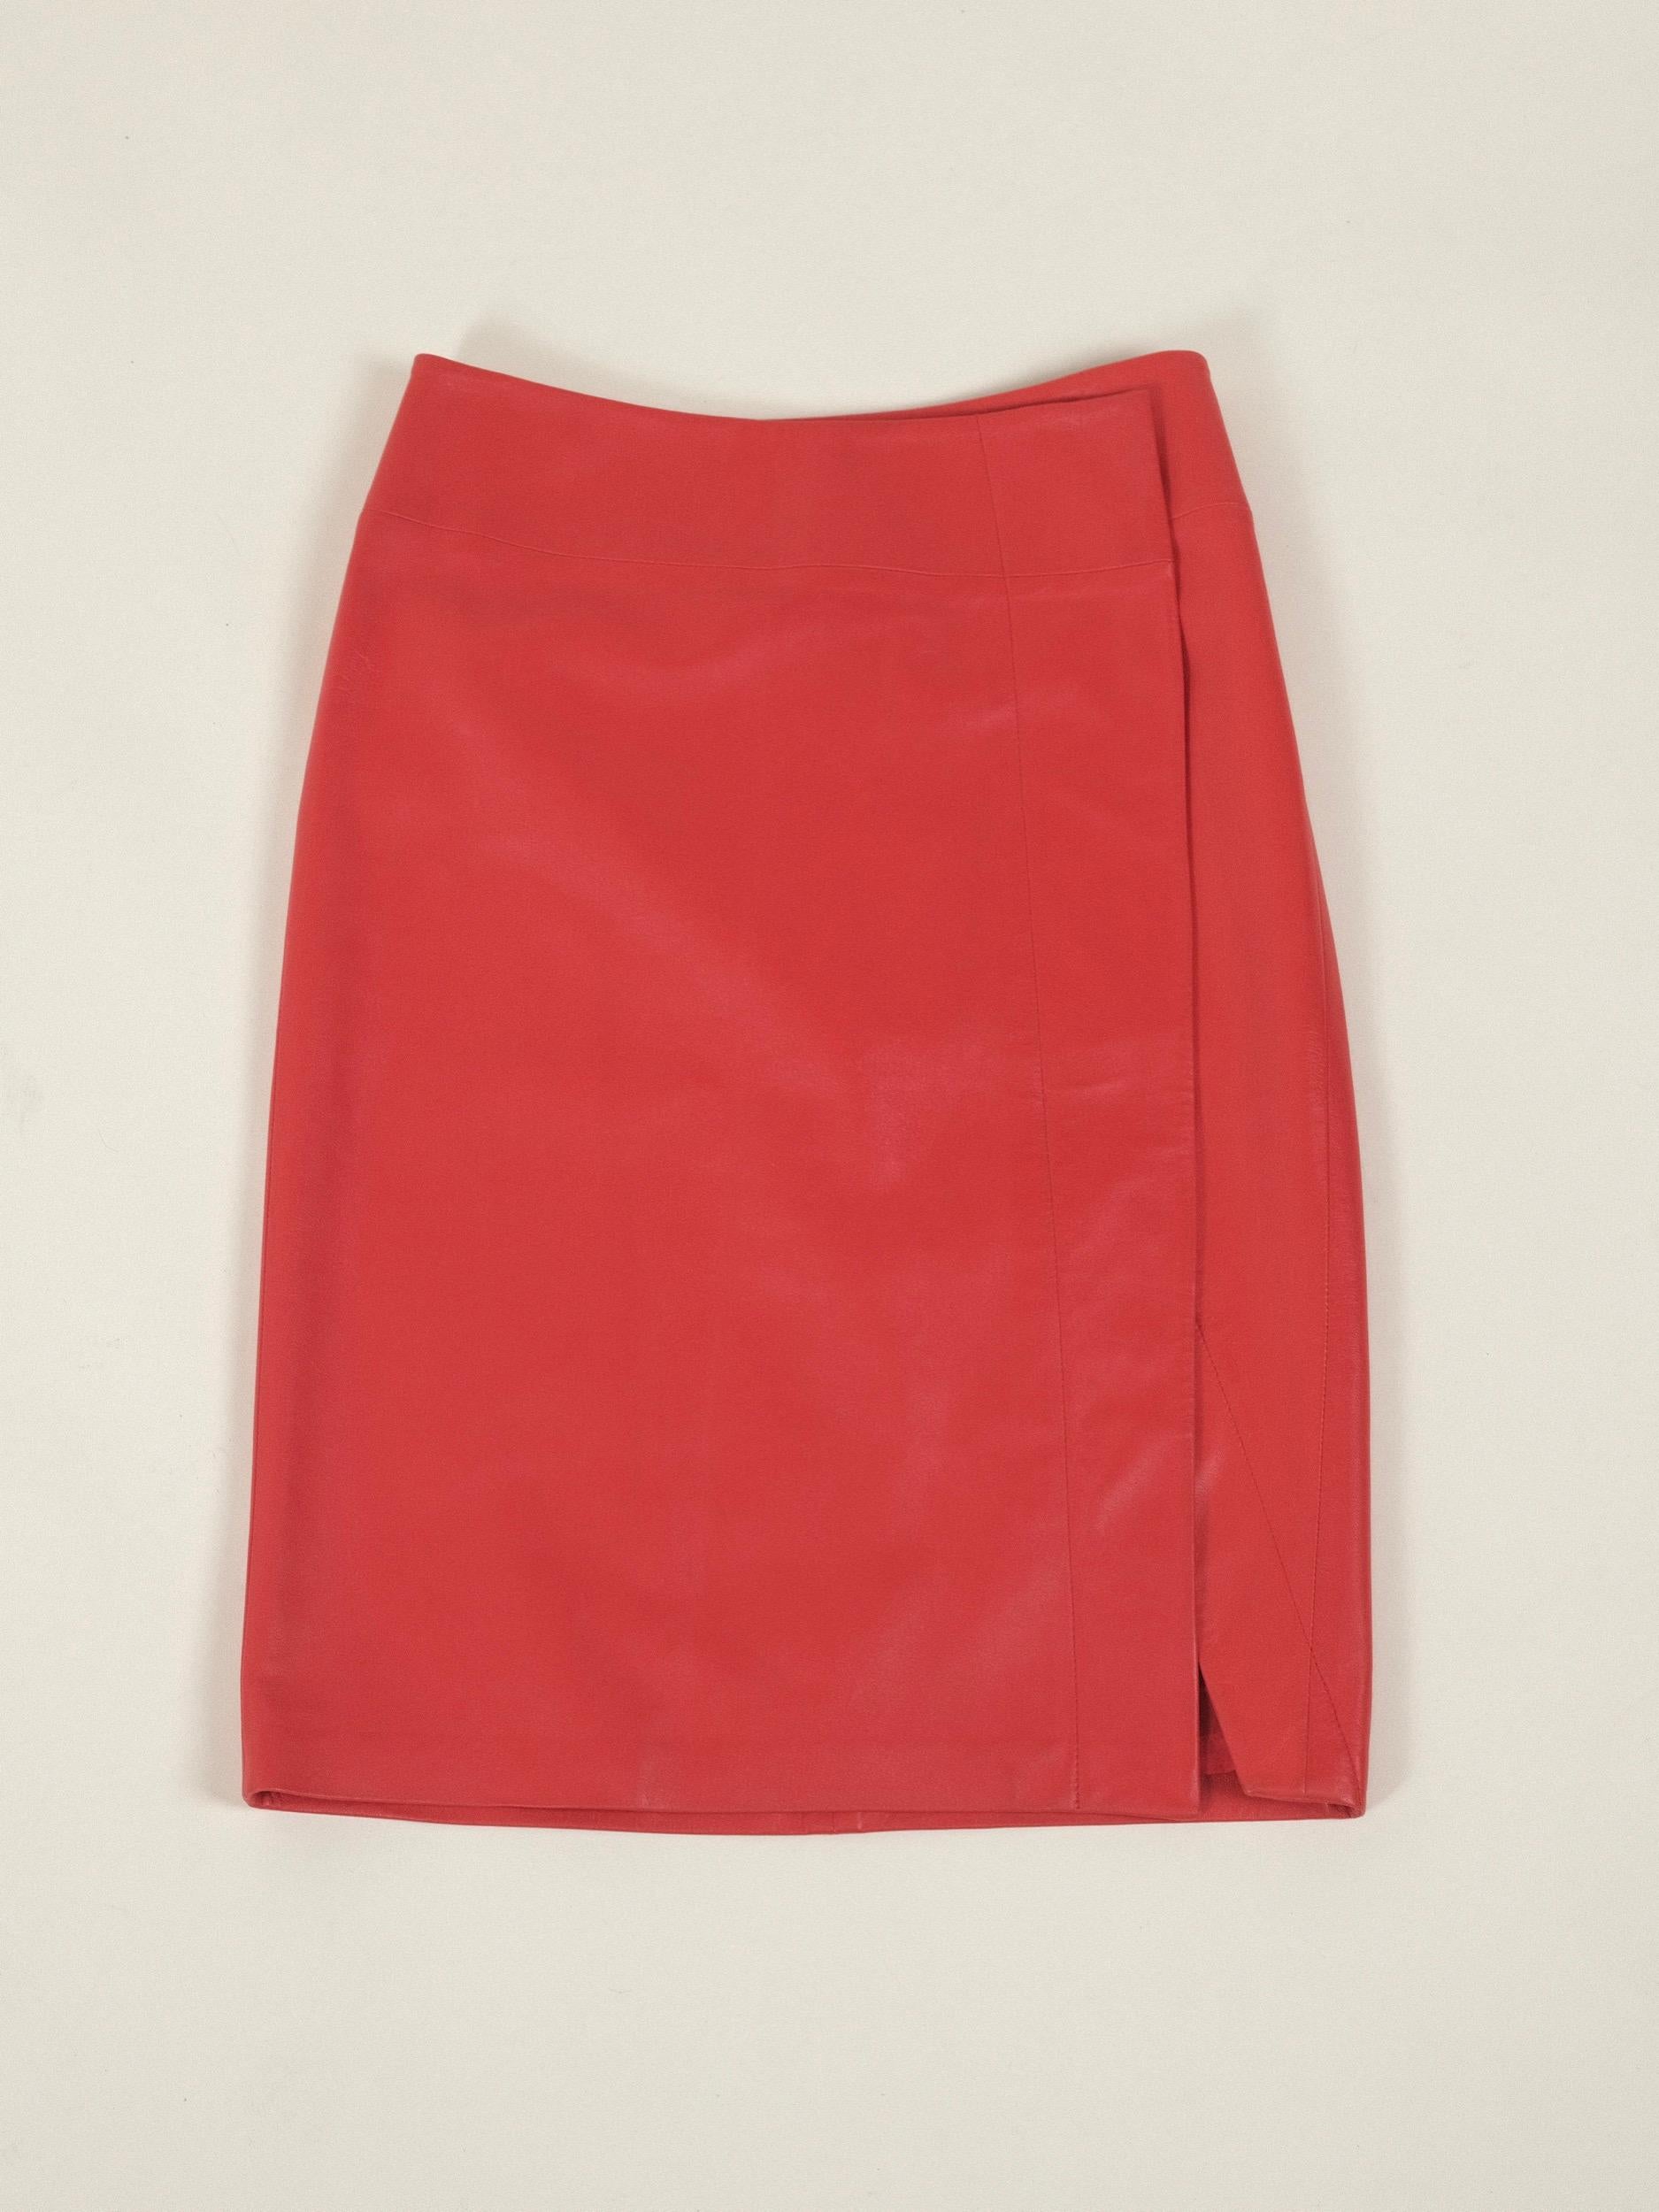 Donna Karan Leather Wrap Skirt Tomato Red Size US4 IT40 FR38 1990's For Sale 1